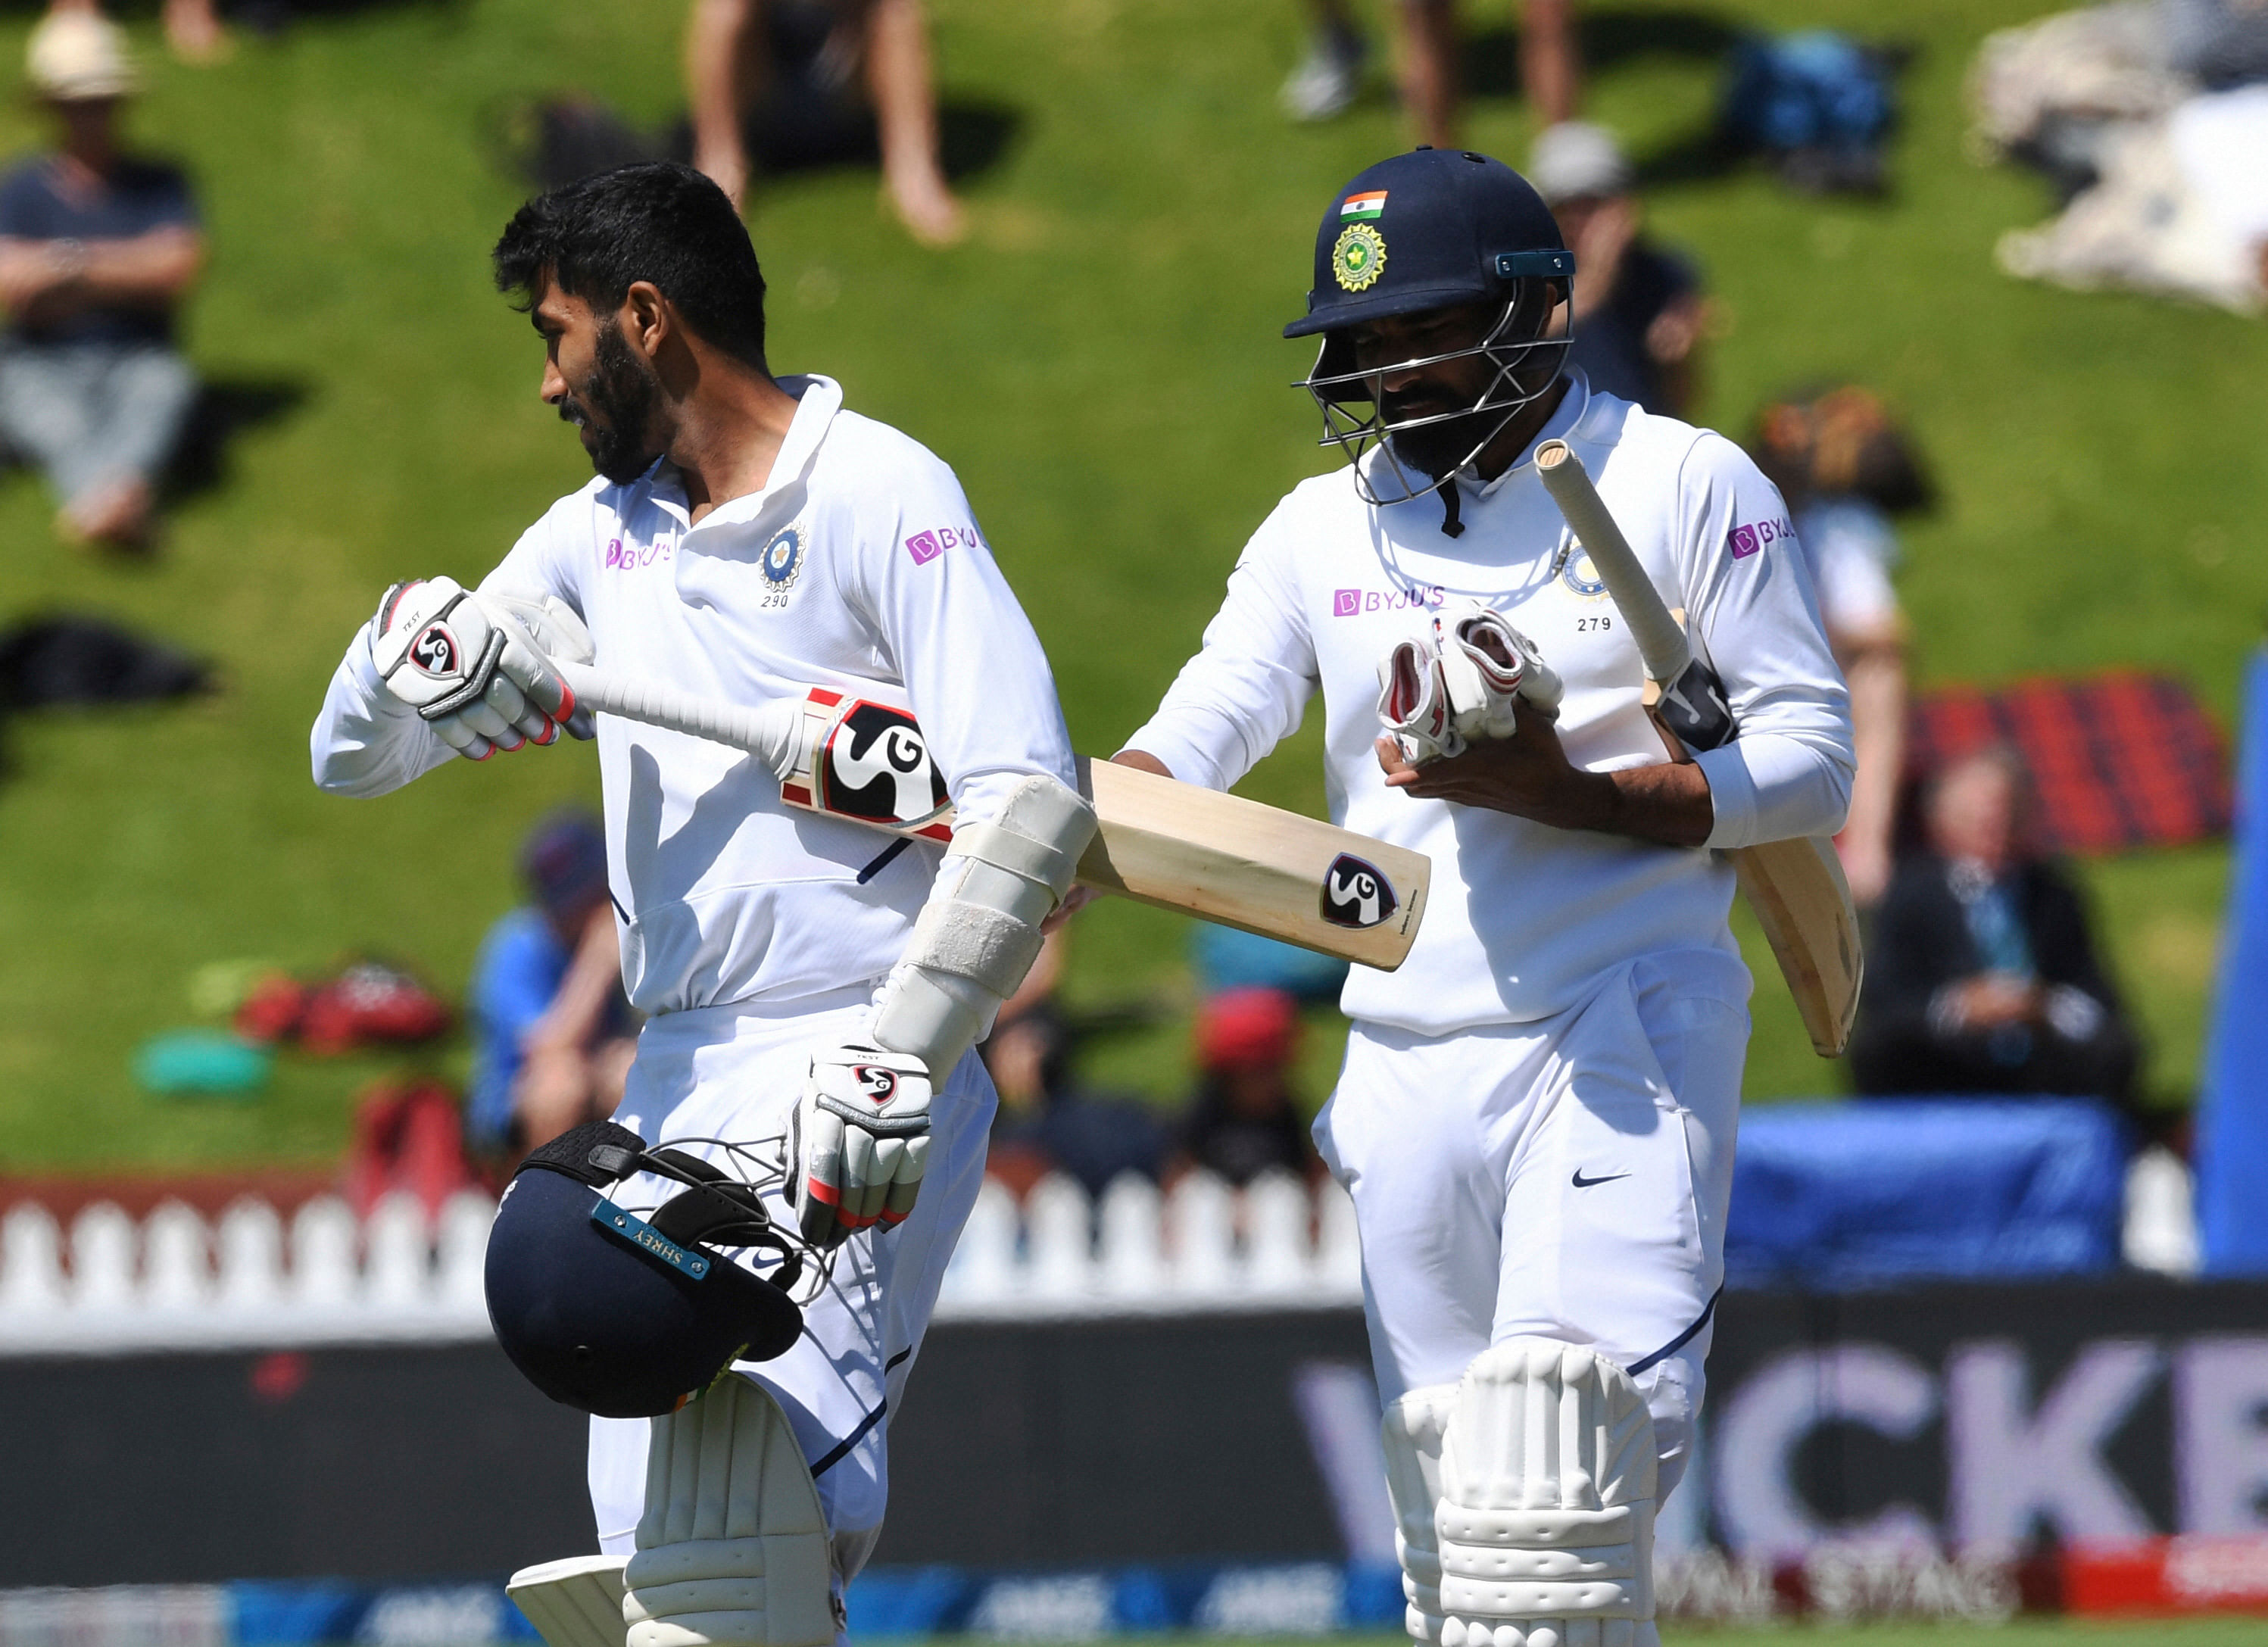 India's Jasprit Bumrah, left, and teammate Mohammed Shami walk from the field after India was dismissed for 191 runs in their second innings leaving New Zealand nine runs to win the first cricket test between India and New Zealand at the Basin Reserve in Wellington, New Zealand. (PTI Photo)